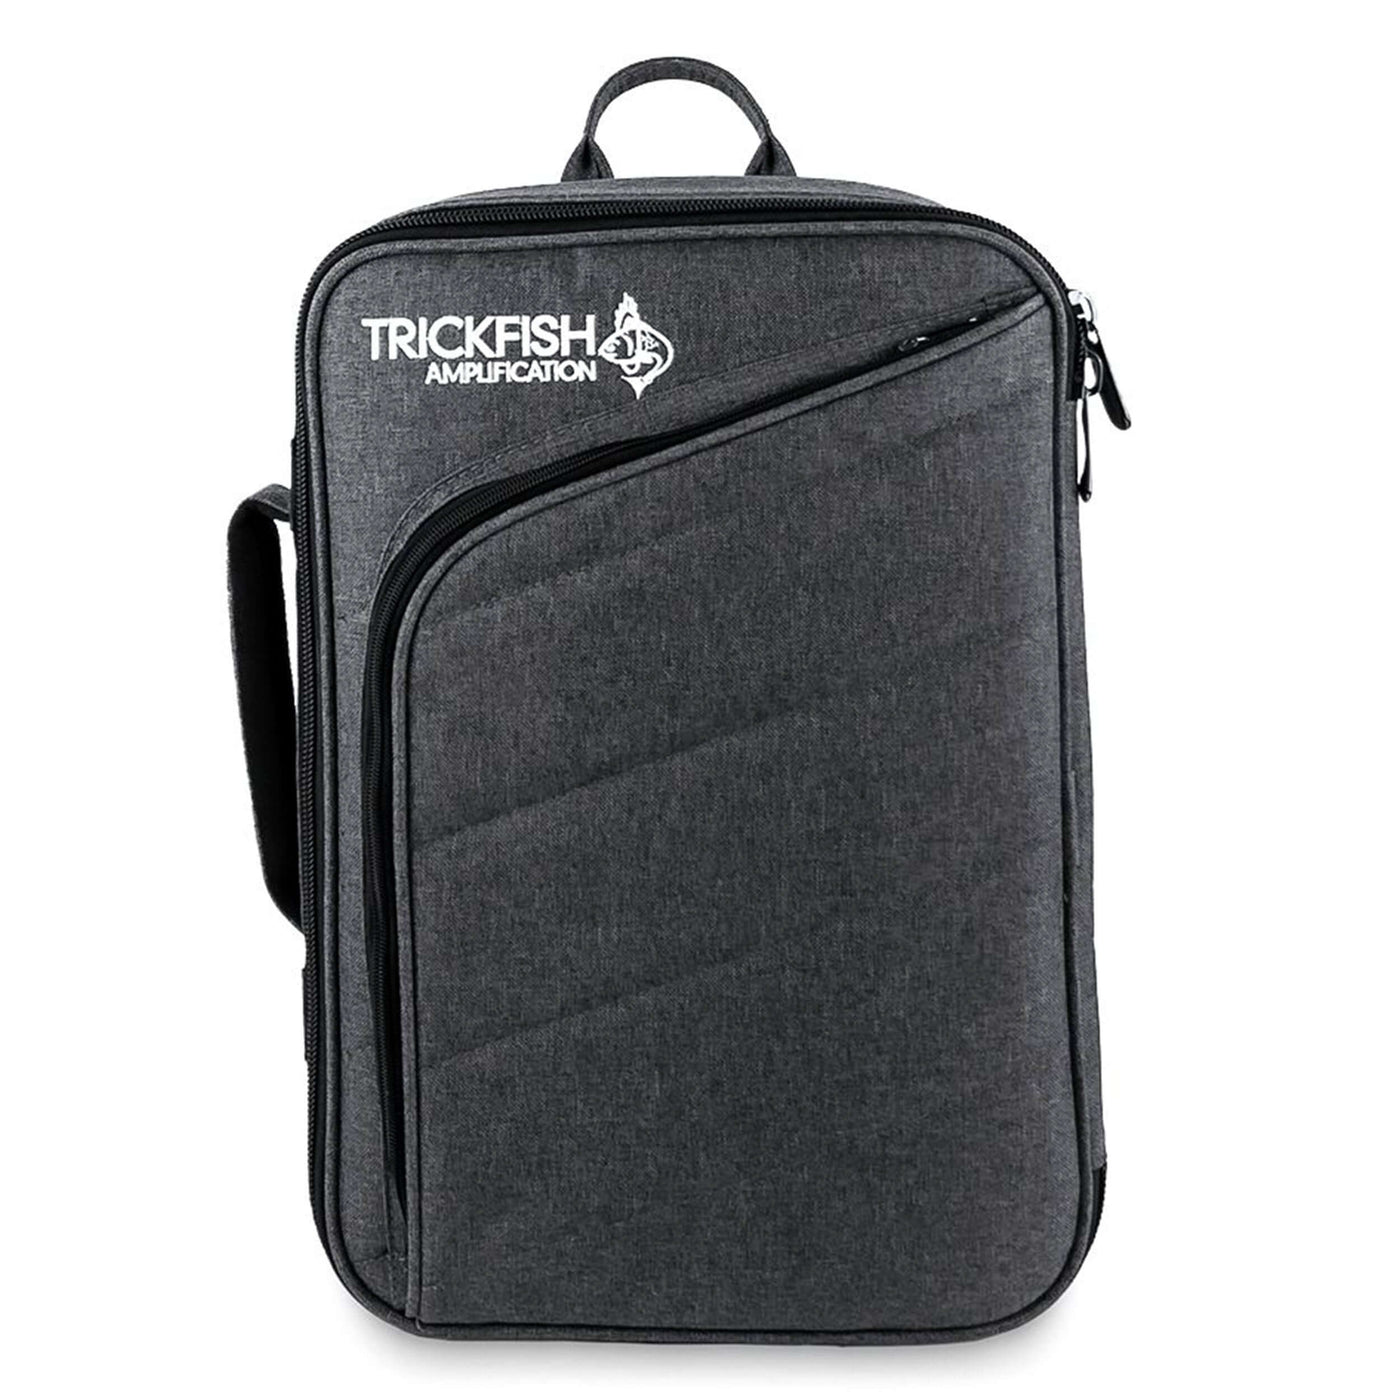 Funda Trickfish Bullhead Amplifier - he Trickfish Amplifier Bag offers the perfect solution for anyone who needs to transport their amp safely and comfortably. We developed this high-quality bag with the gigging bass player in mind. It features 1″ of foam